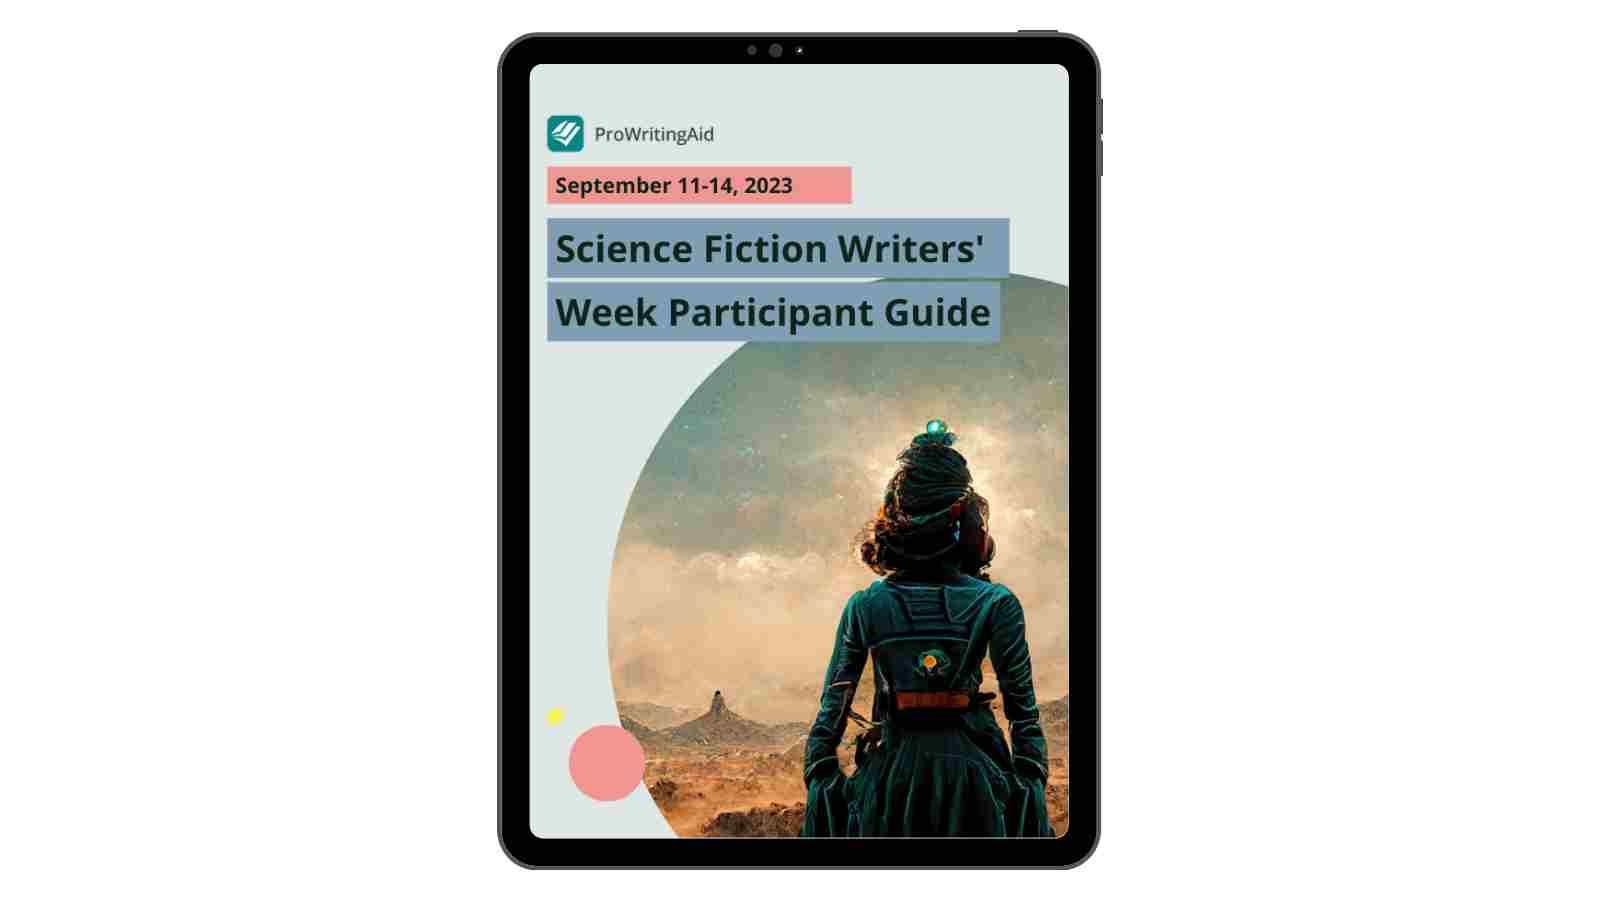 Science fiction writers' week participant guide mockup